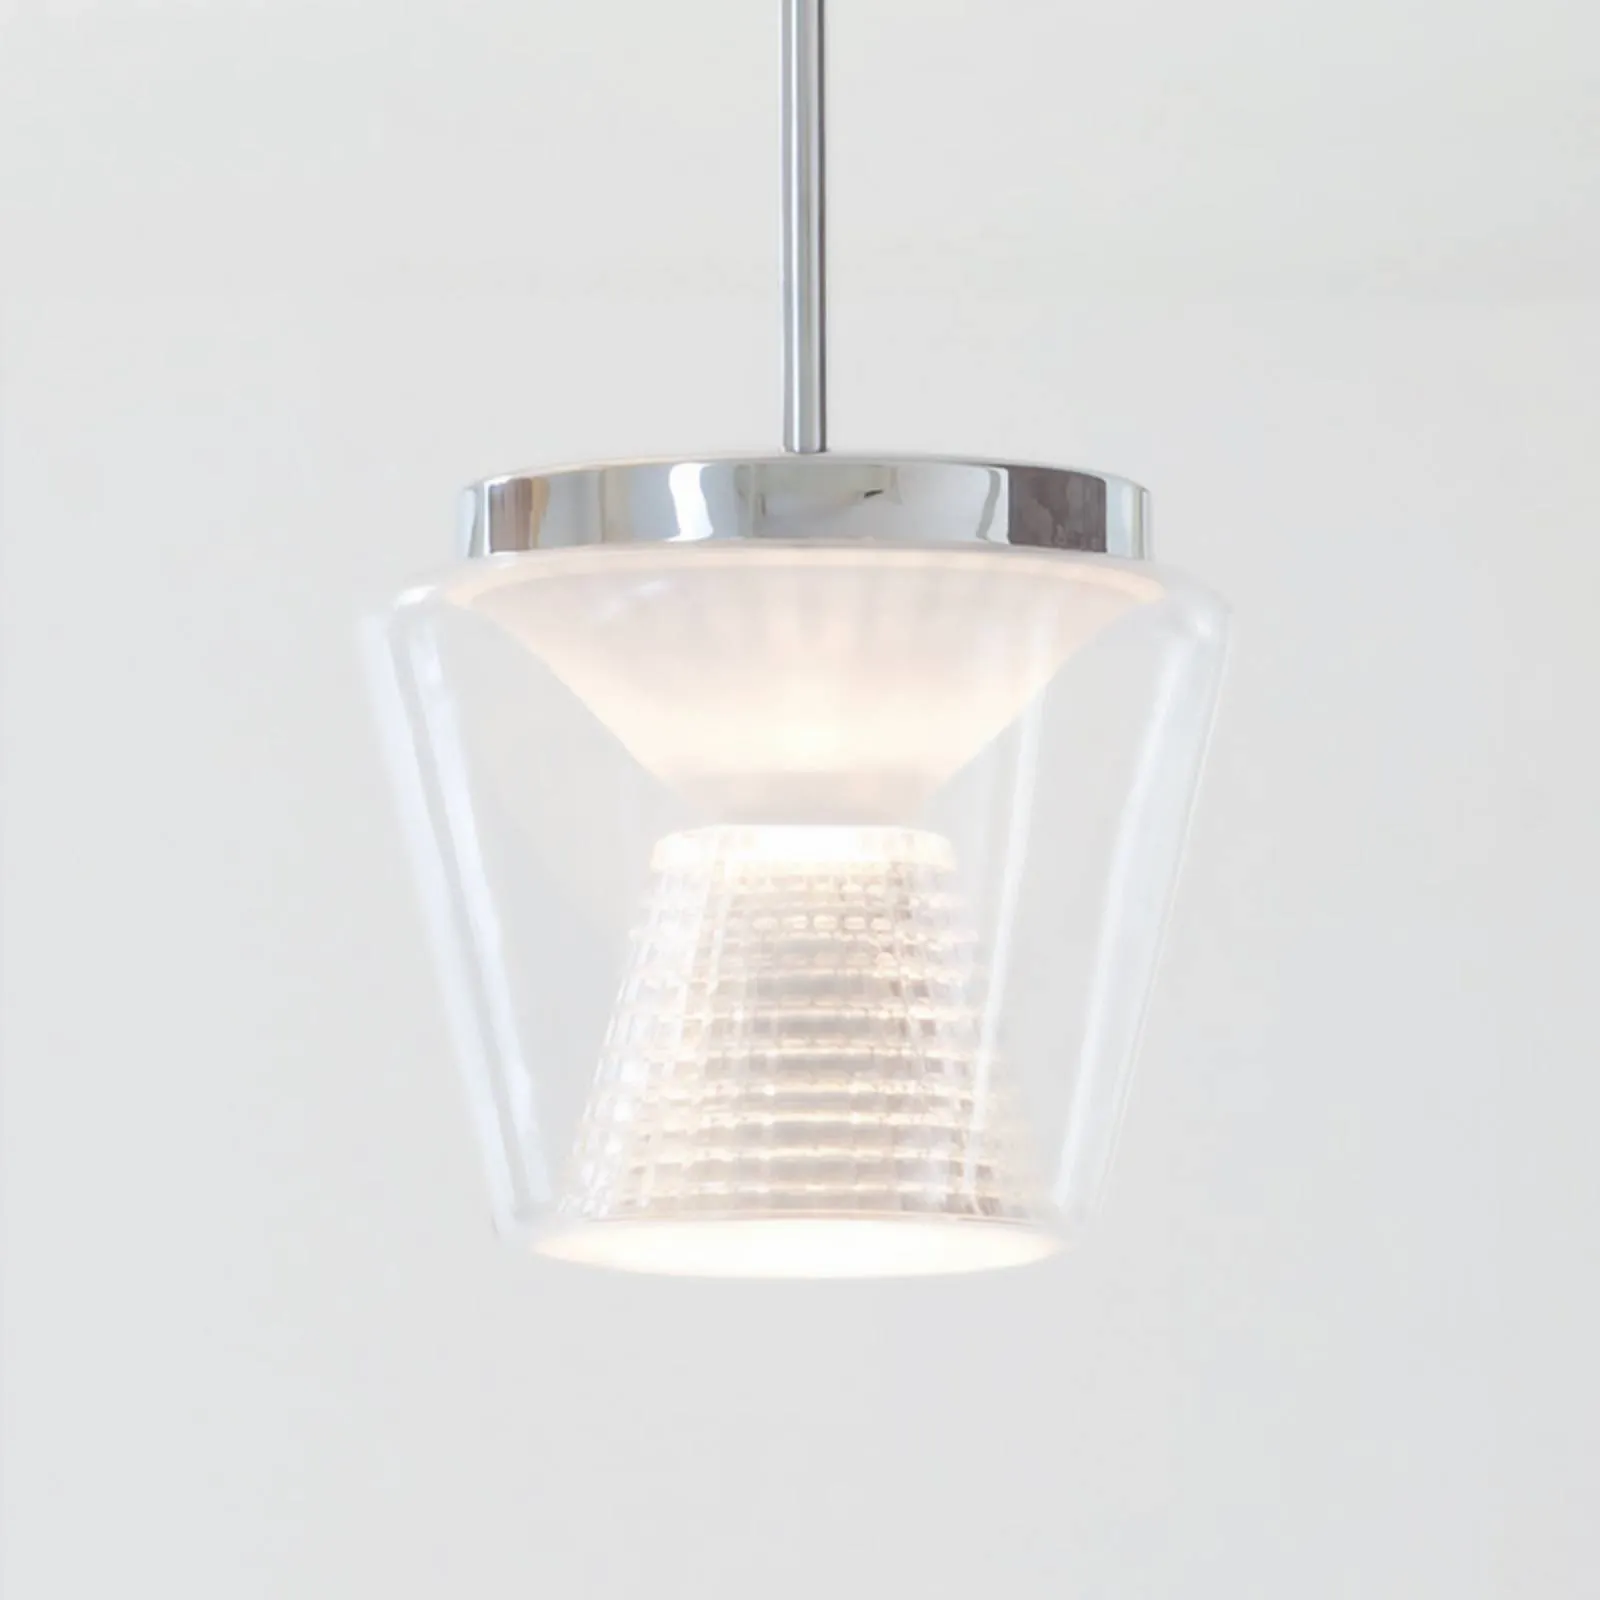 With crystal glass - LED pendant light Annex